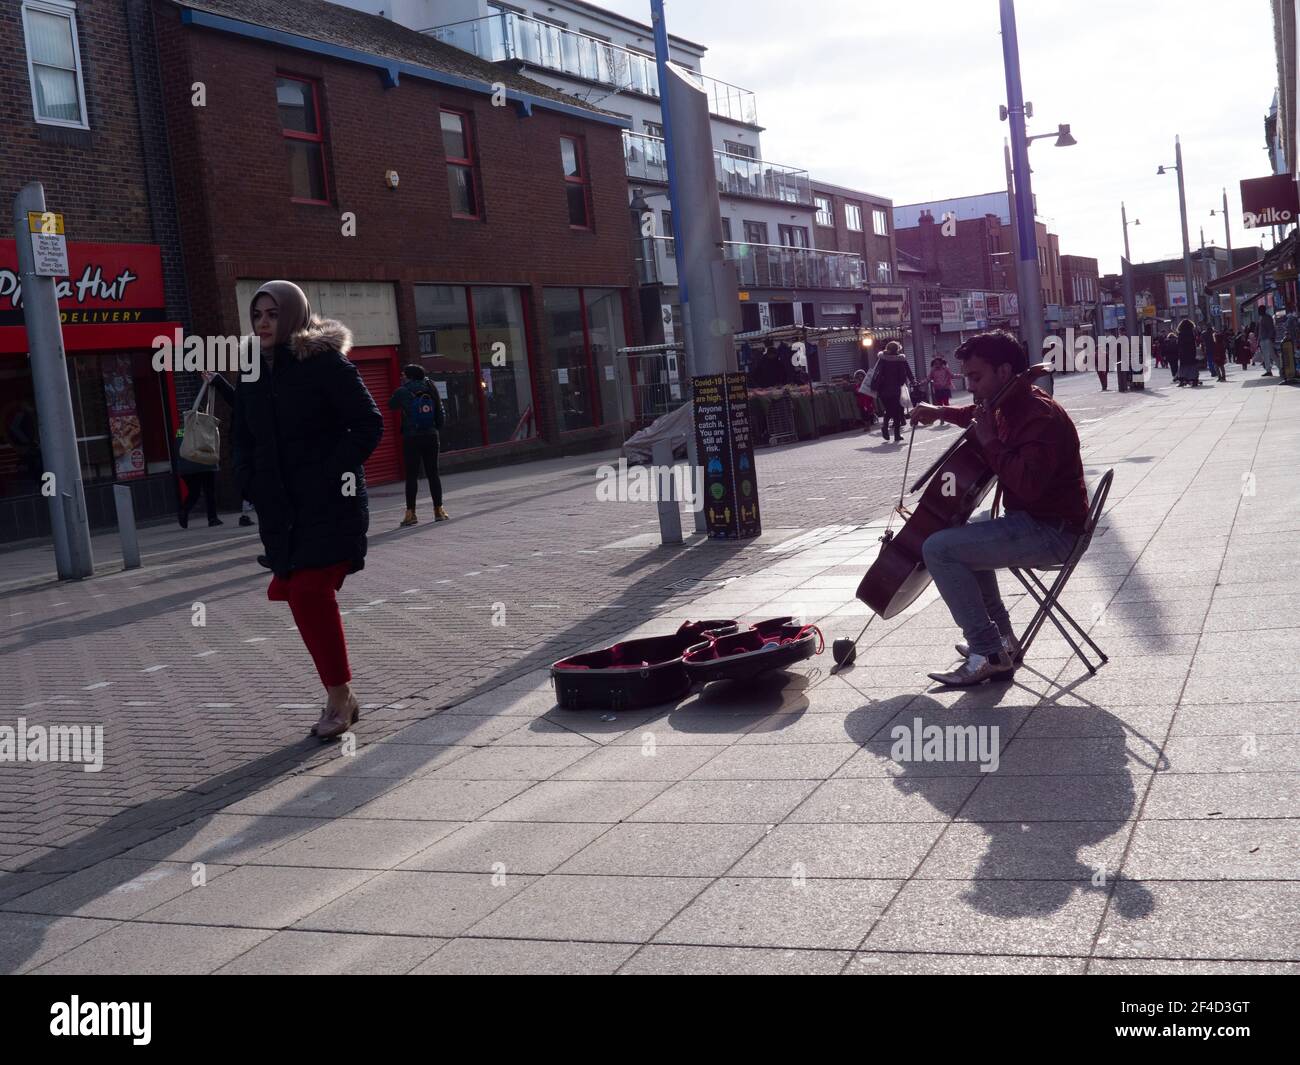 shoppers Walthamstow High Street, Waltham Forest, London with busker playing the cello Stock Photo